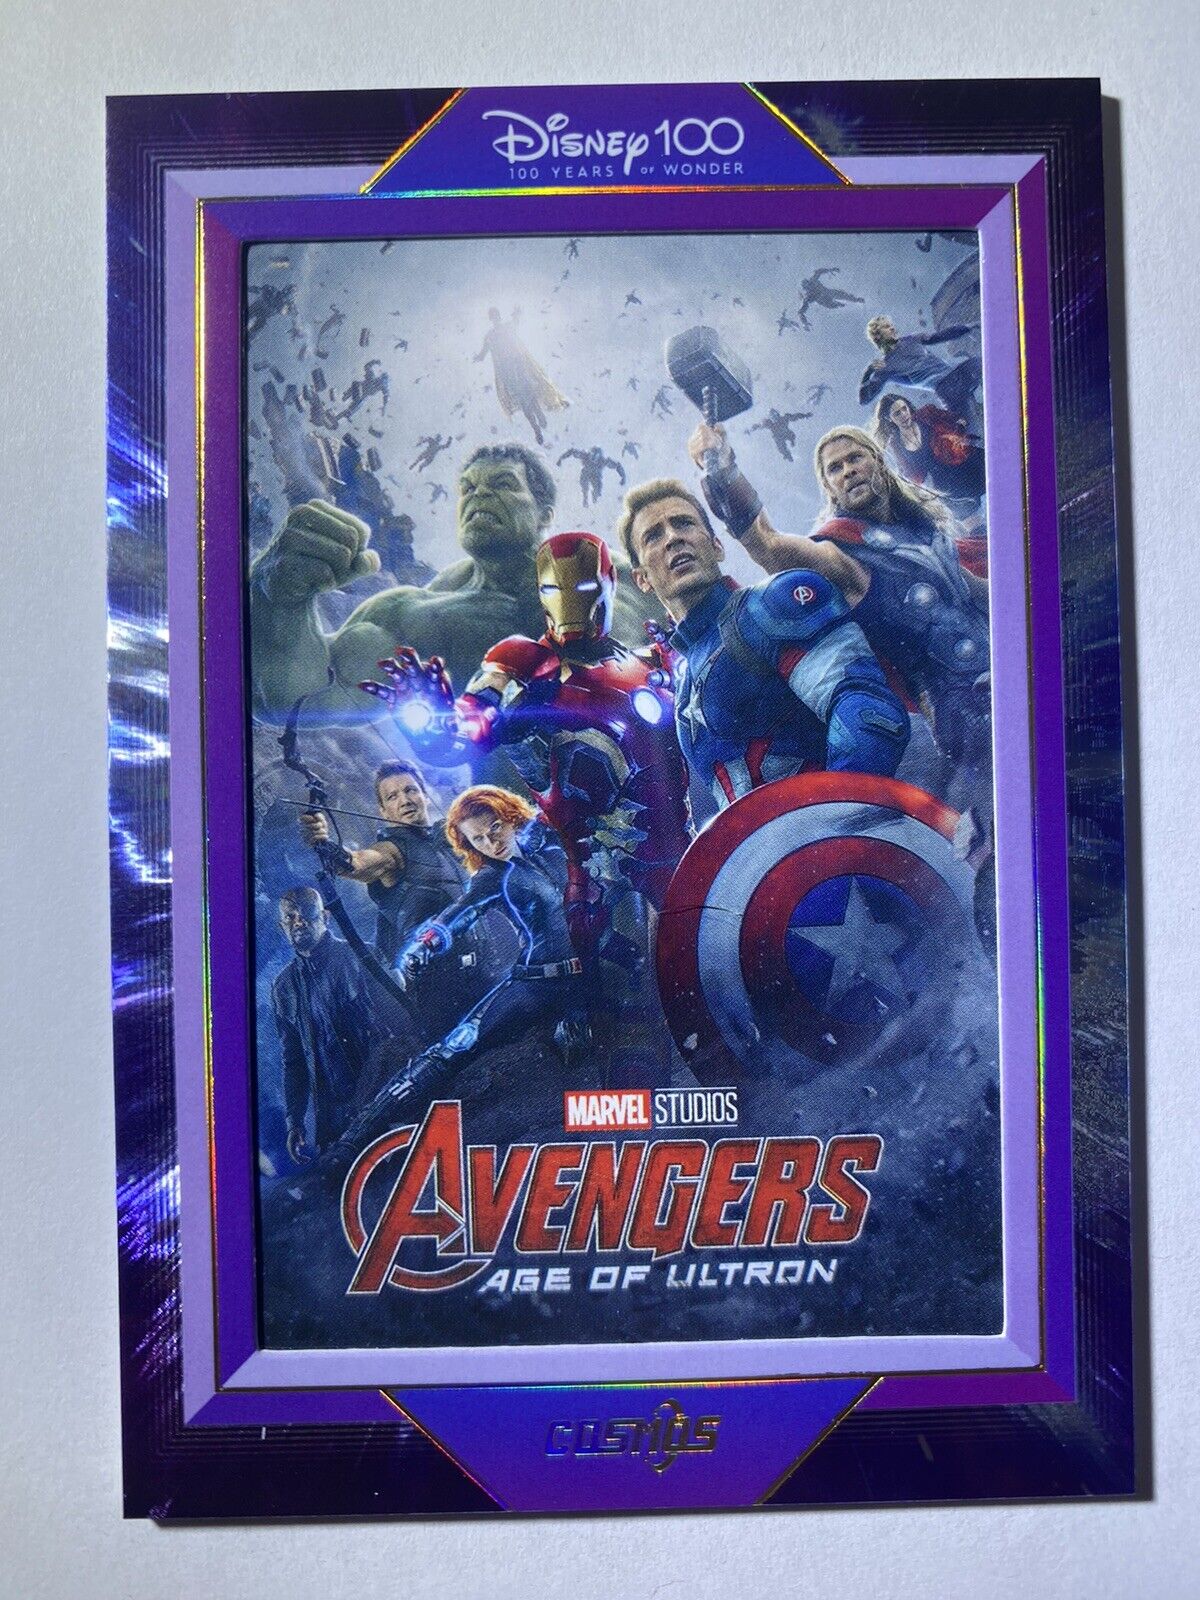 2023 Kakawow Cosmos Disney 100 Marvel Avengers Age Of Ultron Movie Poster/288 SP